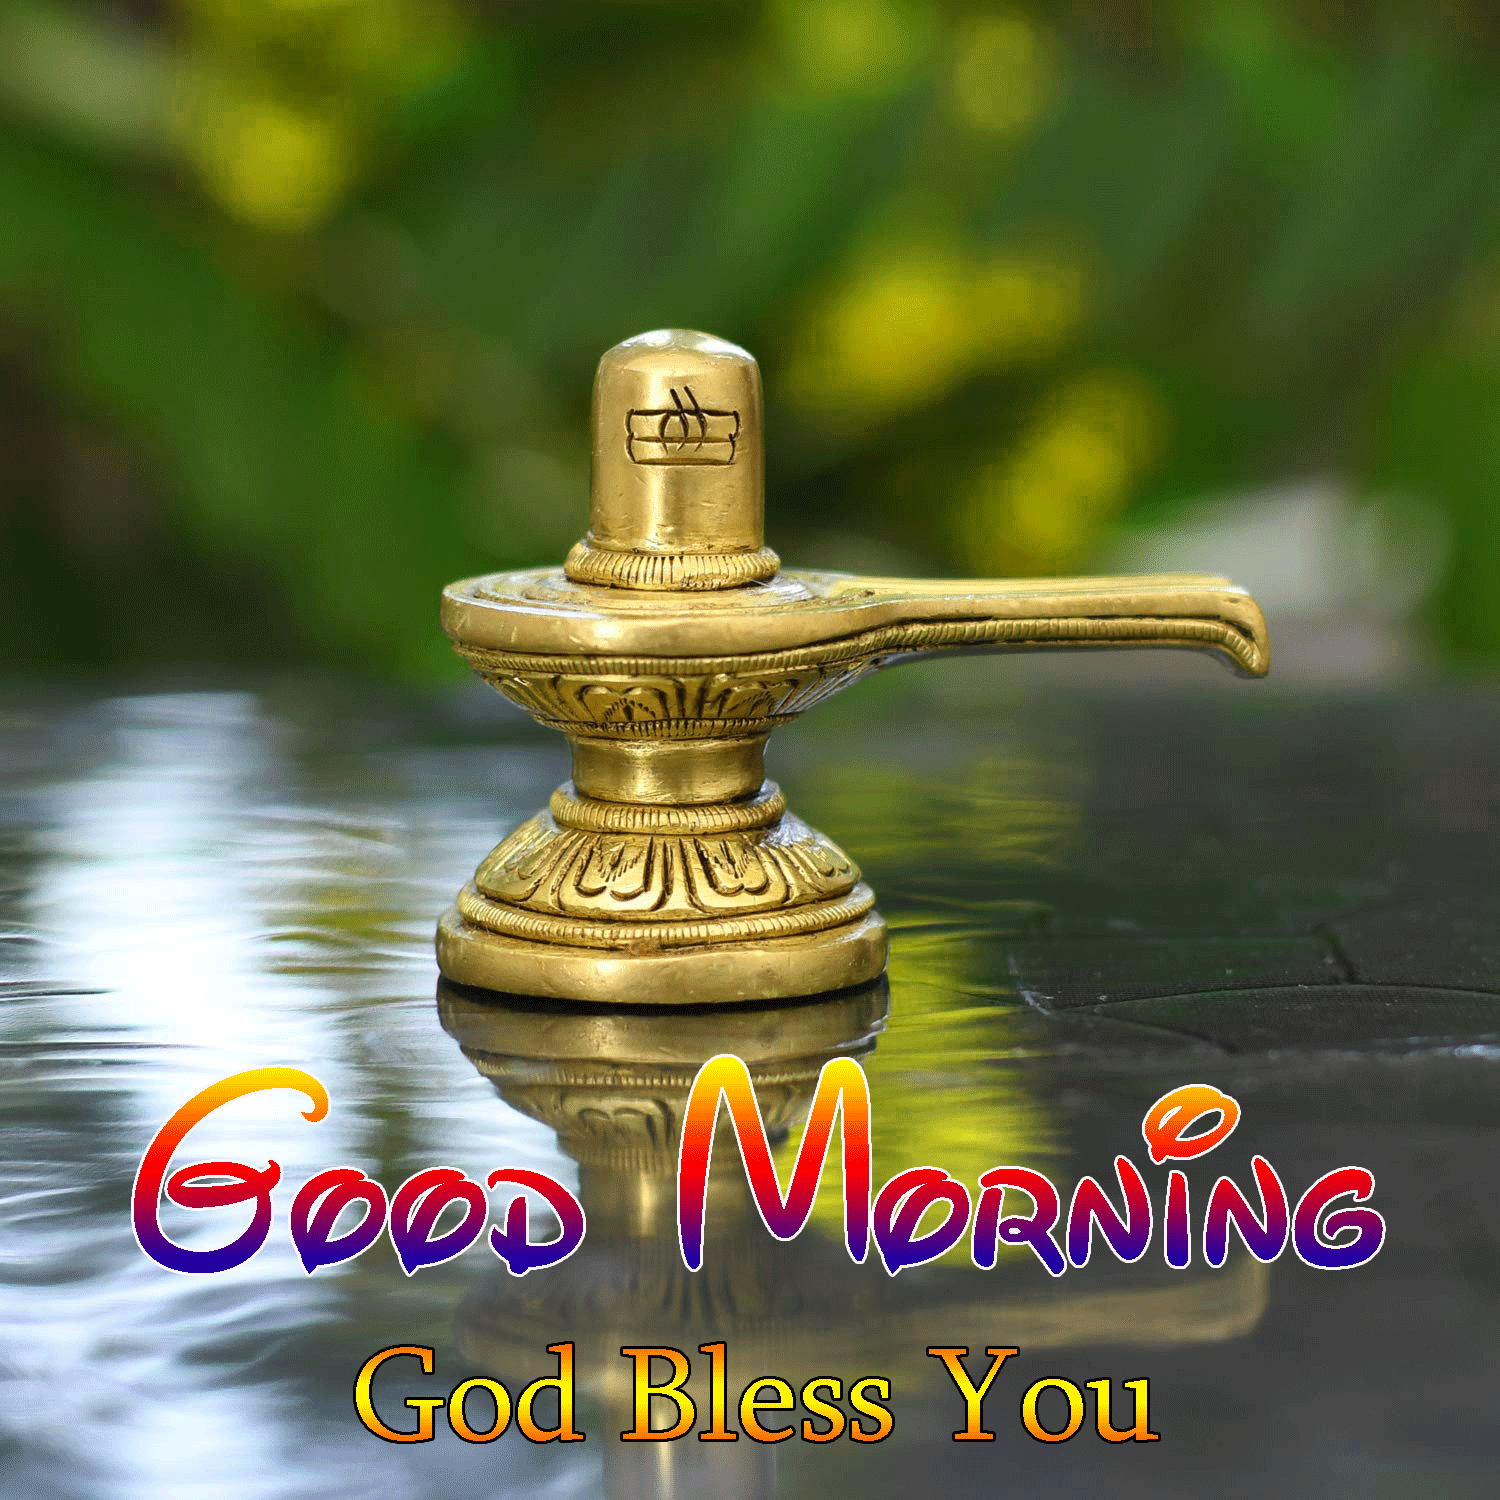 Good Morning Images With Hindu God Wallpapers